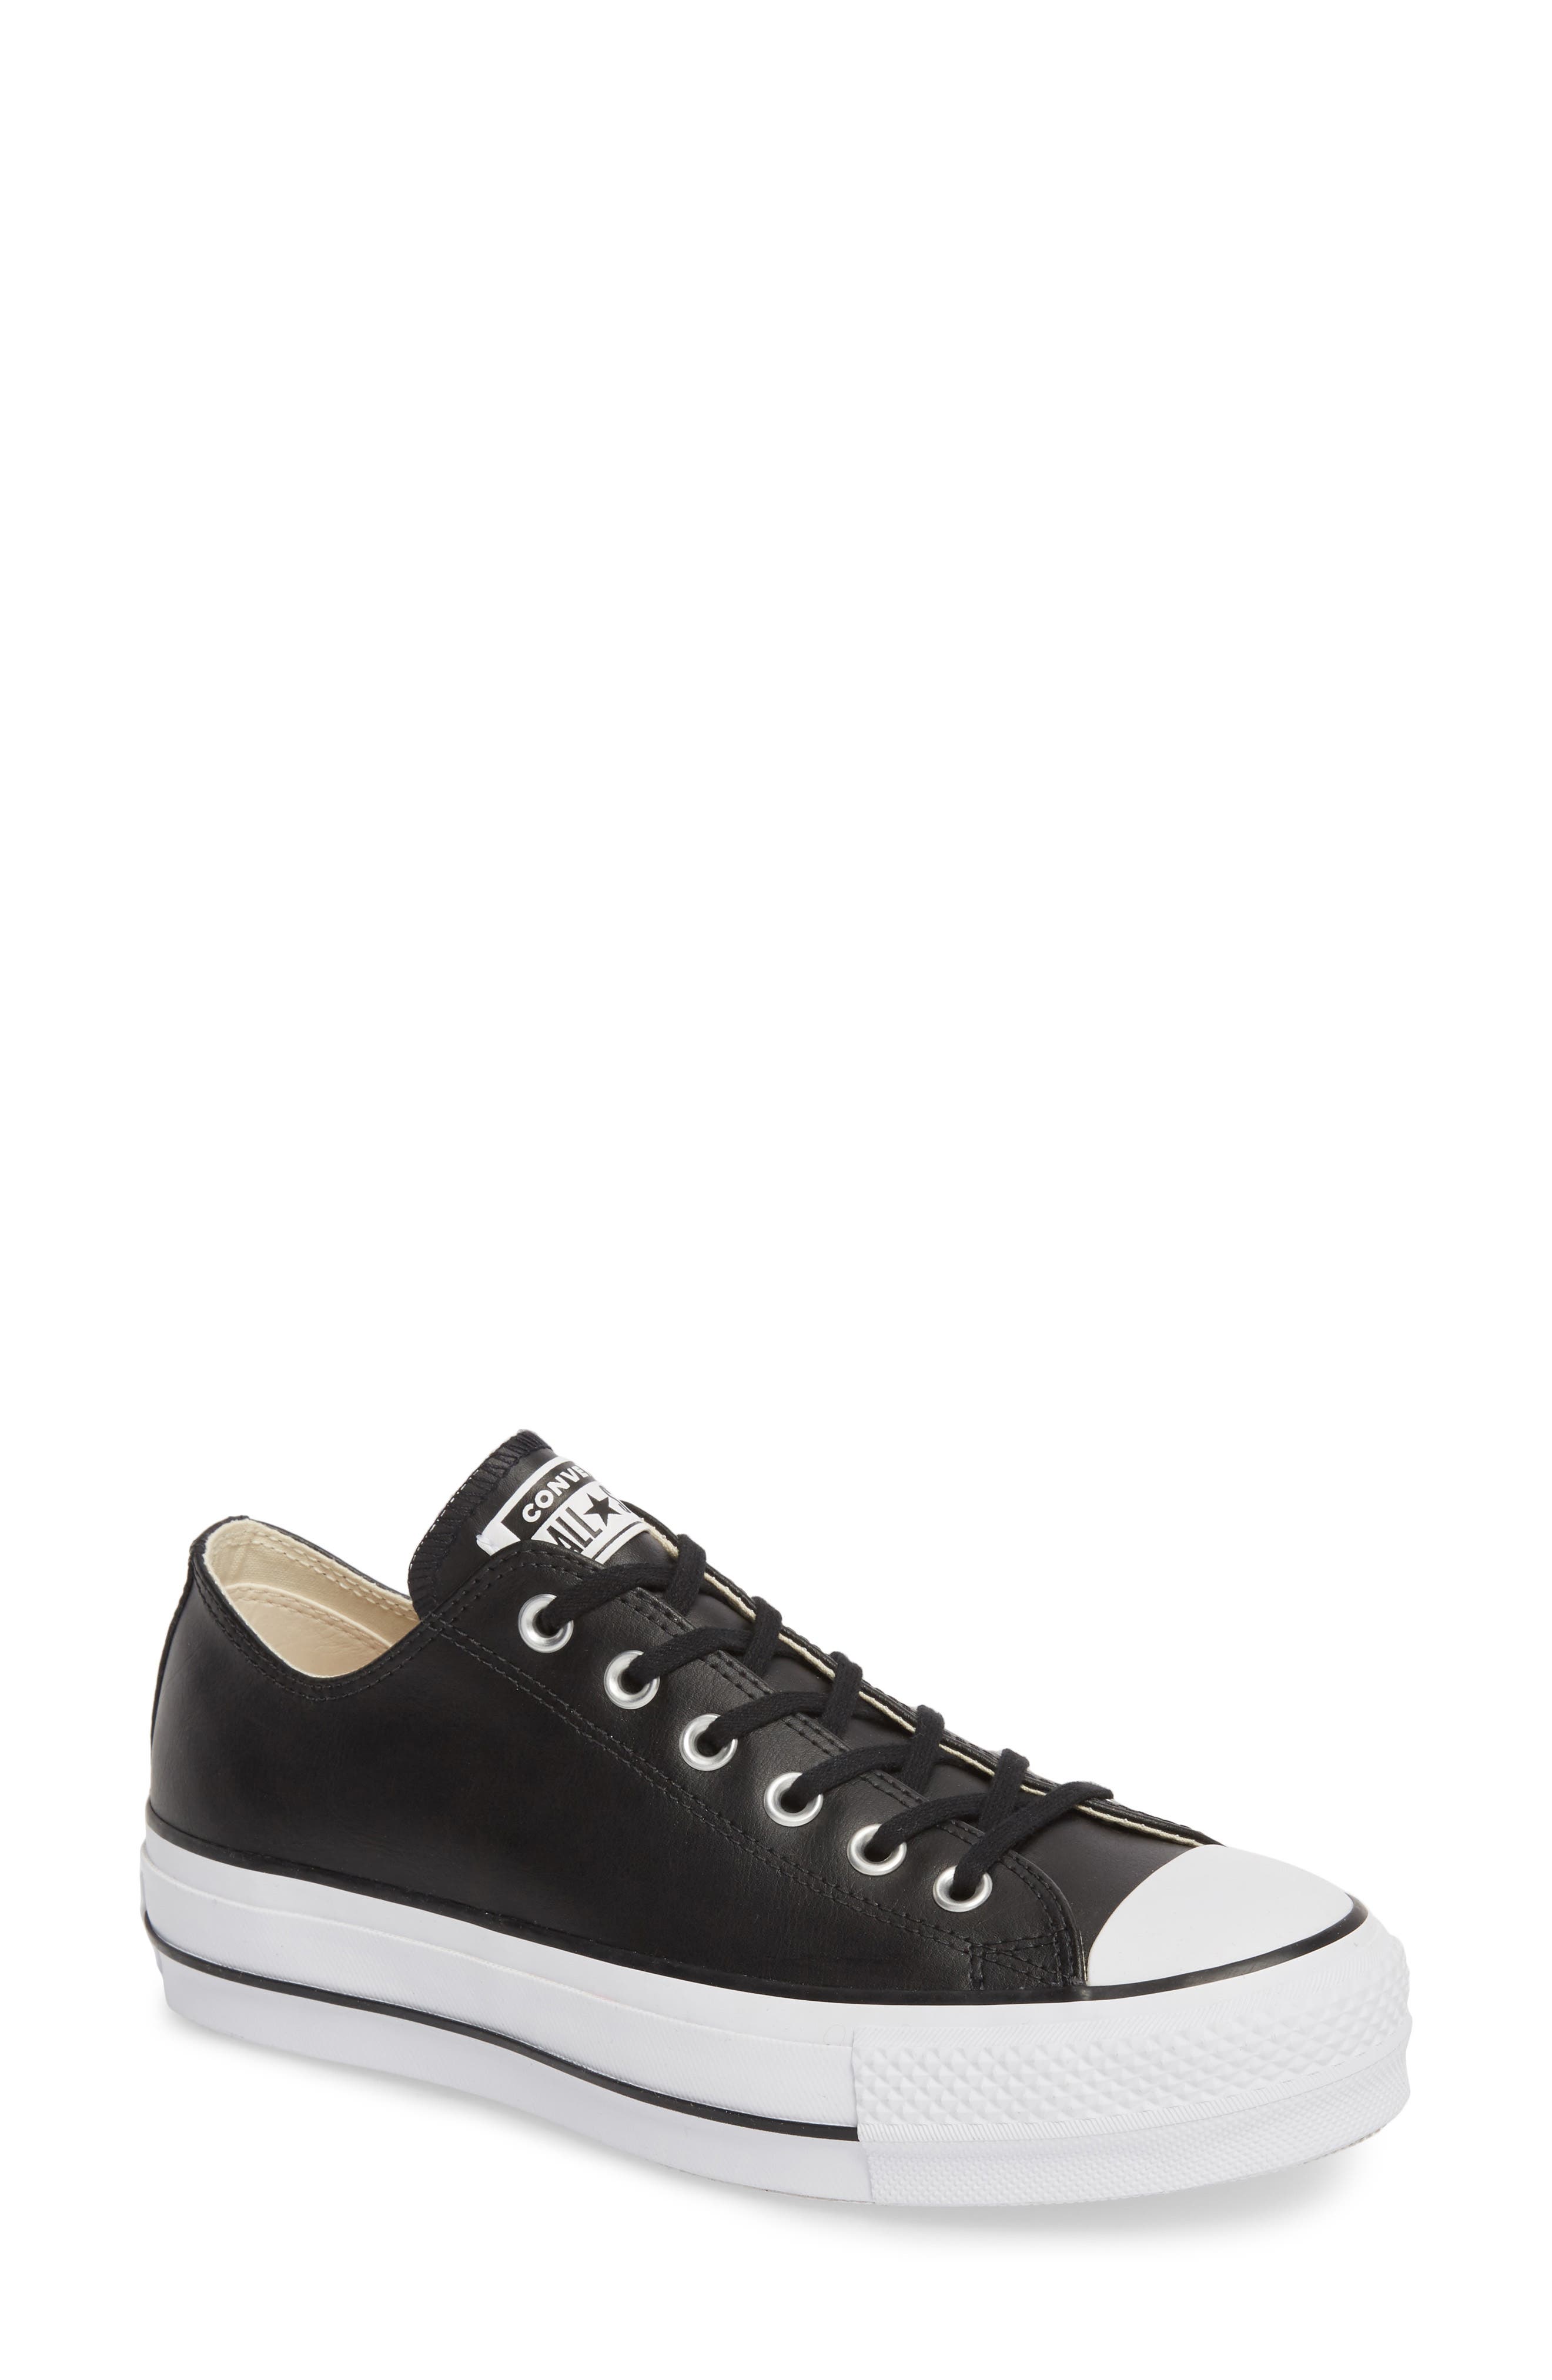 converse leather platform sneakers